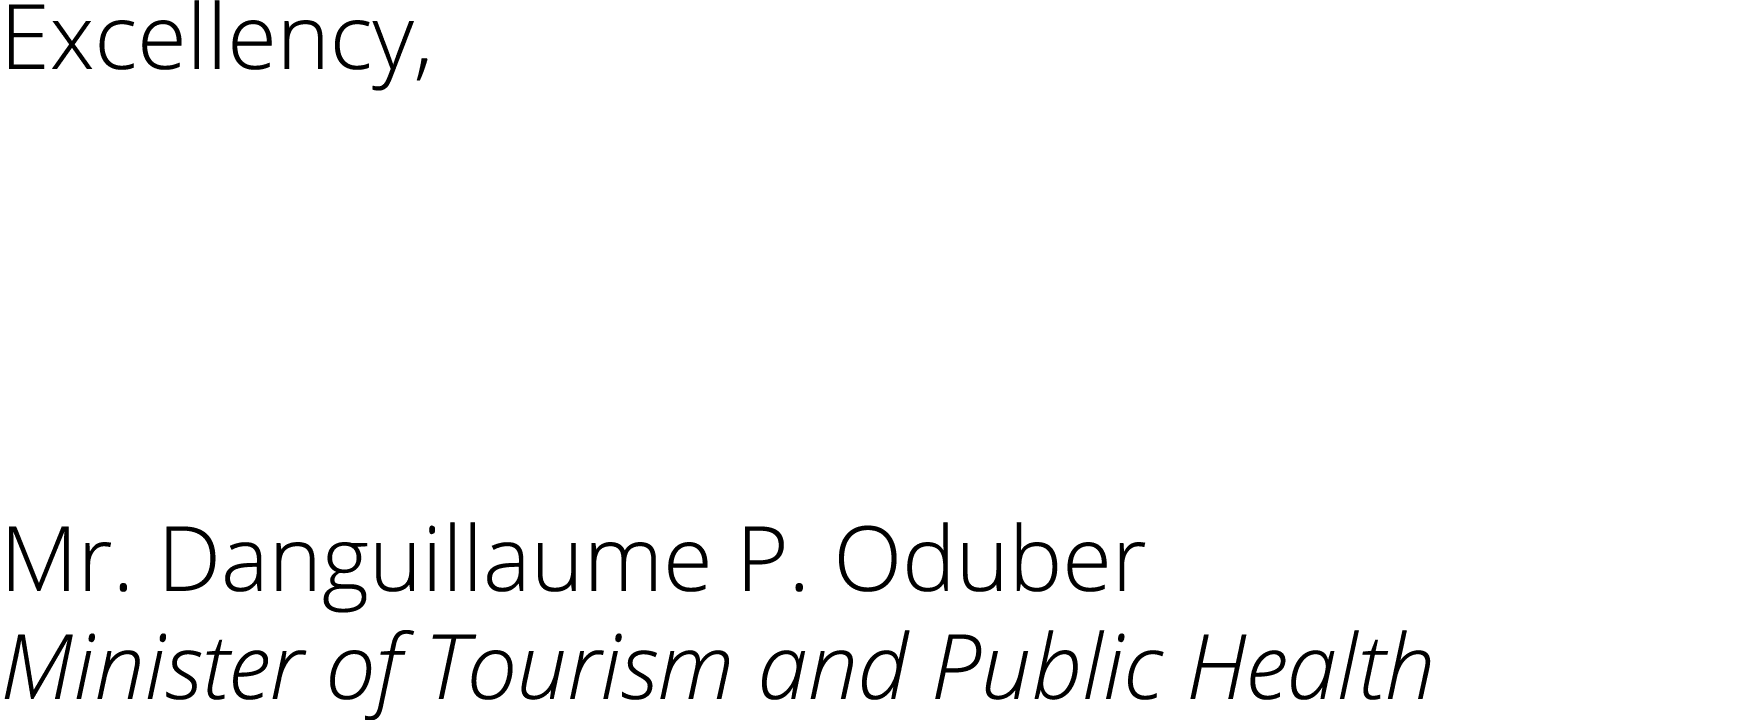 Excellency, Mr. Danguillaume P. Oduber Minister of Tourism and Public Health